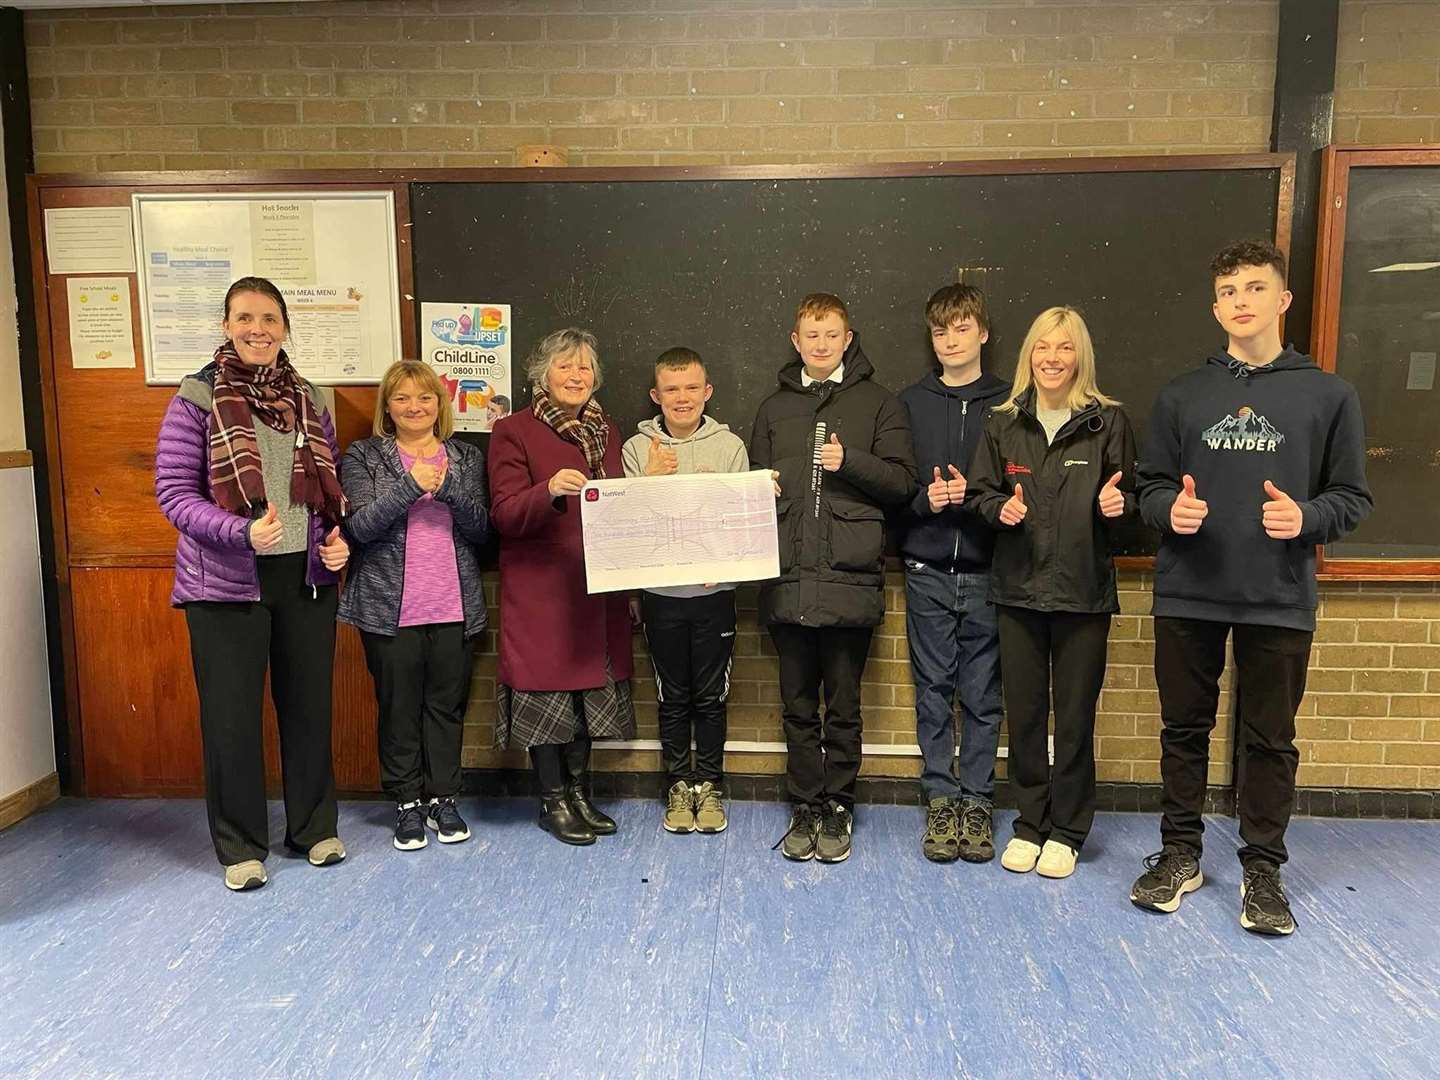 Volunteer Lorraine King, leader Lesley Mawhinney, Lorna Creswell, young leader Travis Bremner (13), Connor MacDonald (15), Joshua Smith (14), Active Schools coordinator Rosalyn Carruthers and young leader Austin Davies (14).